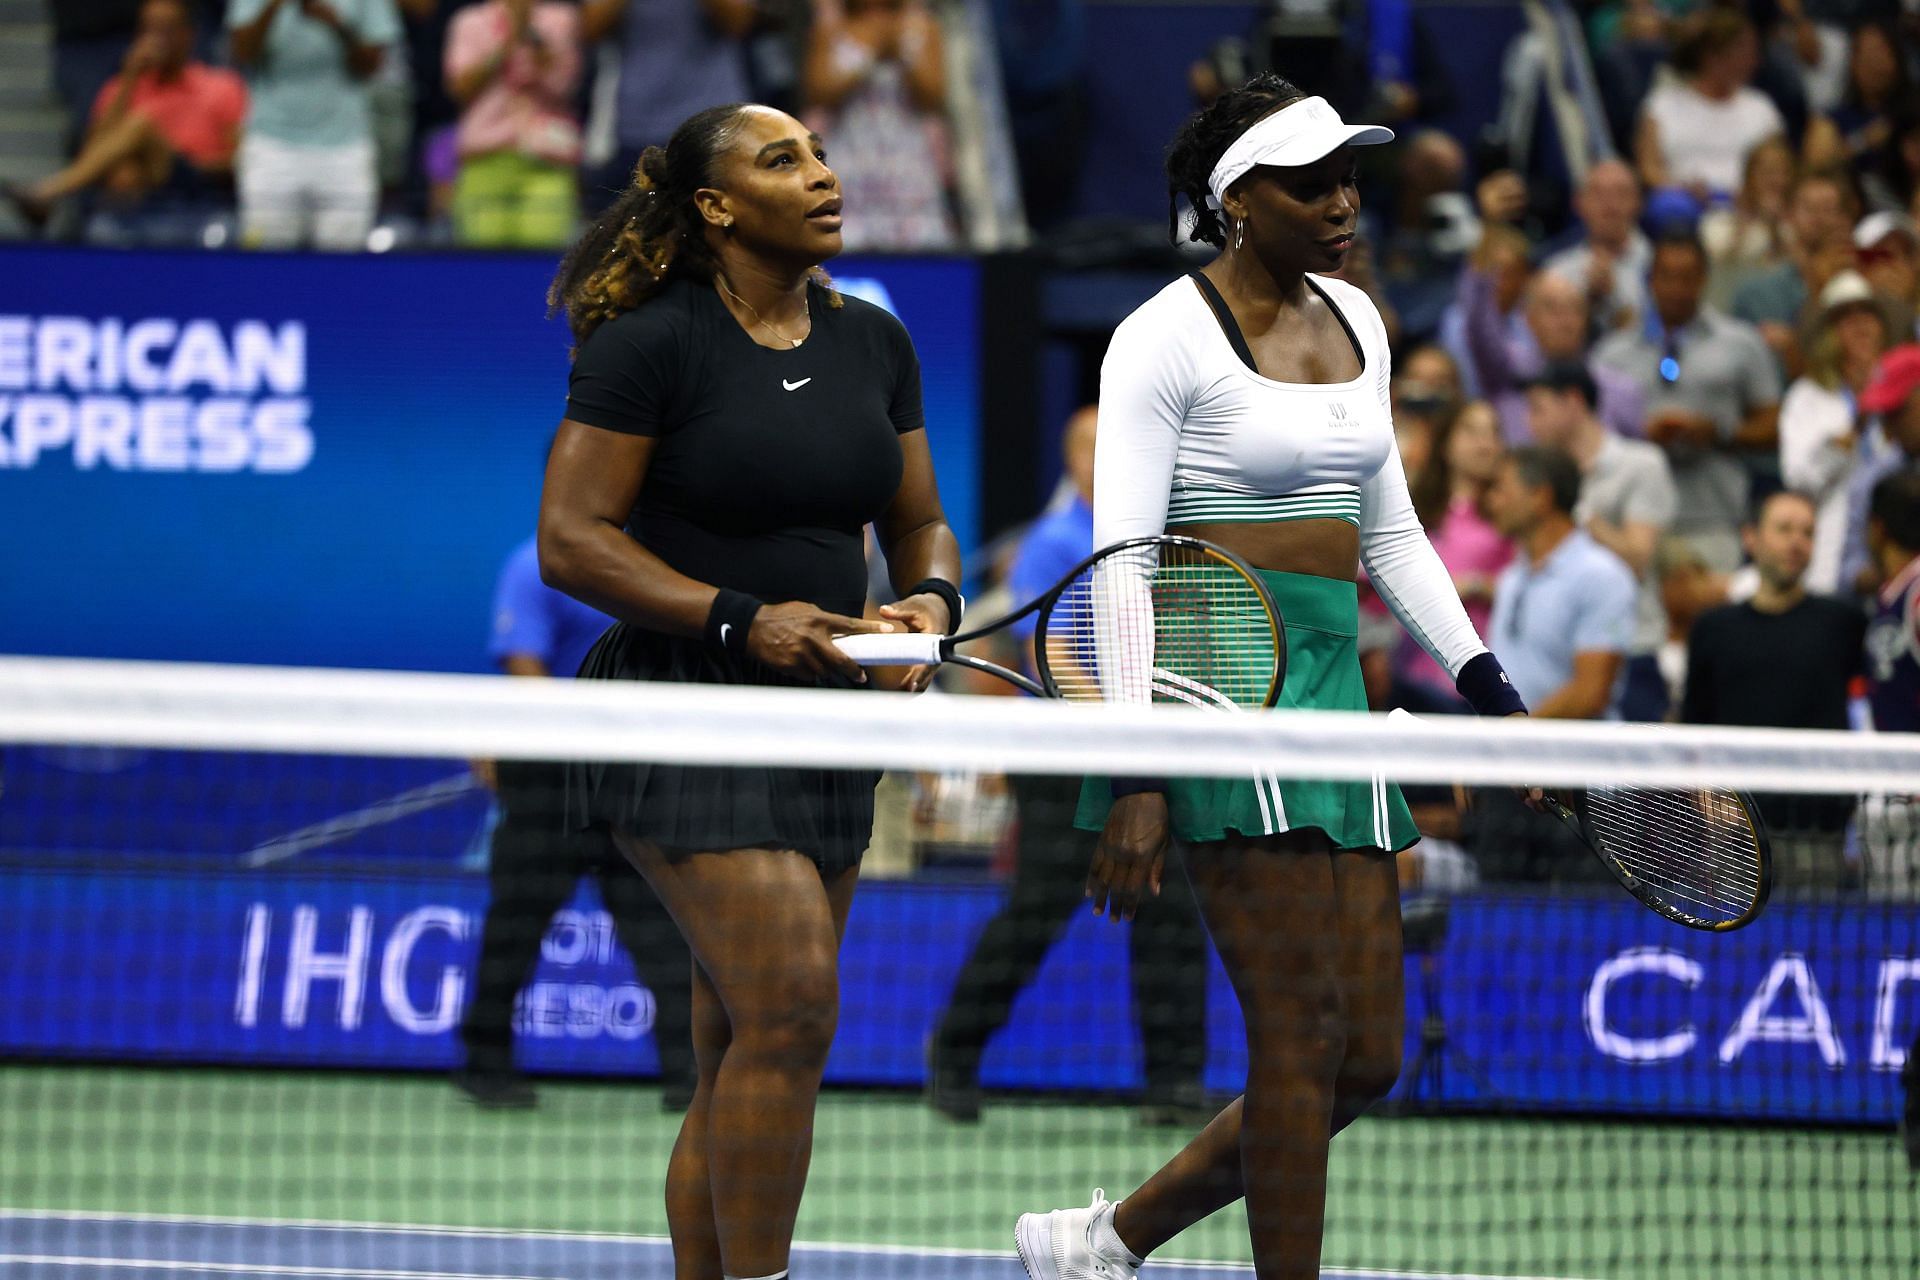 Serena Williams and Venus Williams after being defeated by Lucie Hradecka and Linda Noskova at the 2022 US Open - Day 4